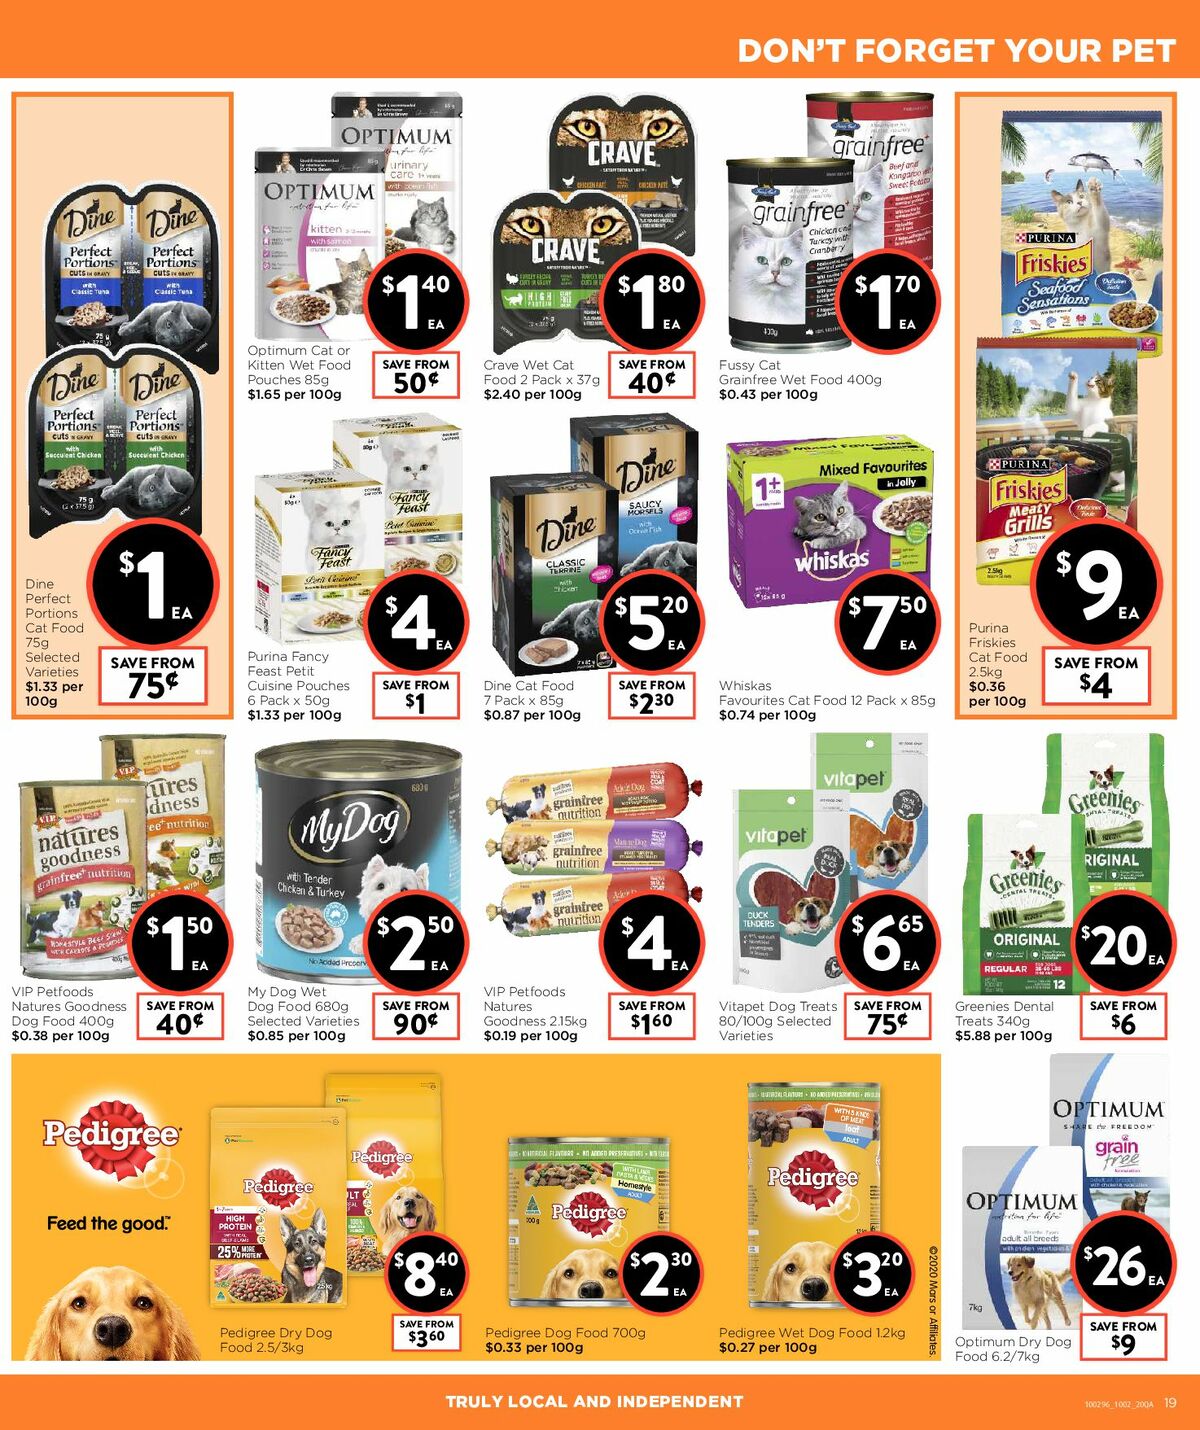 FoodWorks Supermarket Catalogues from 10 February